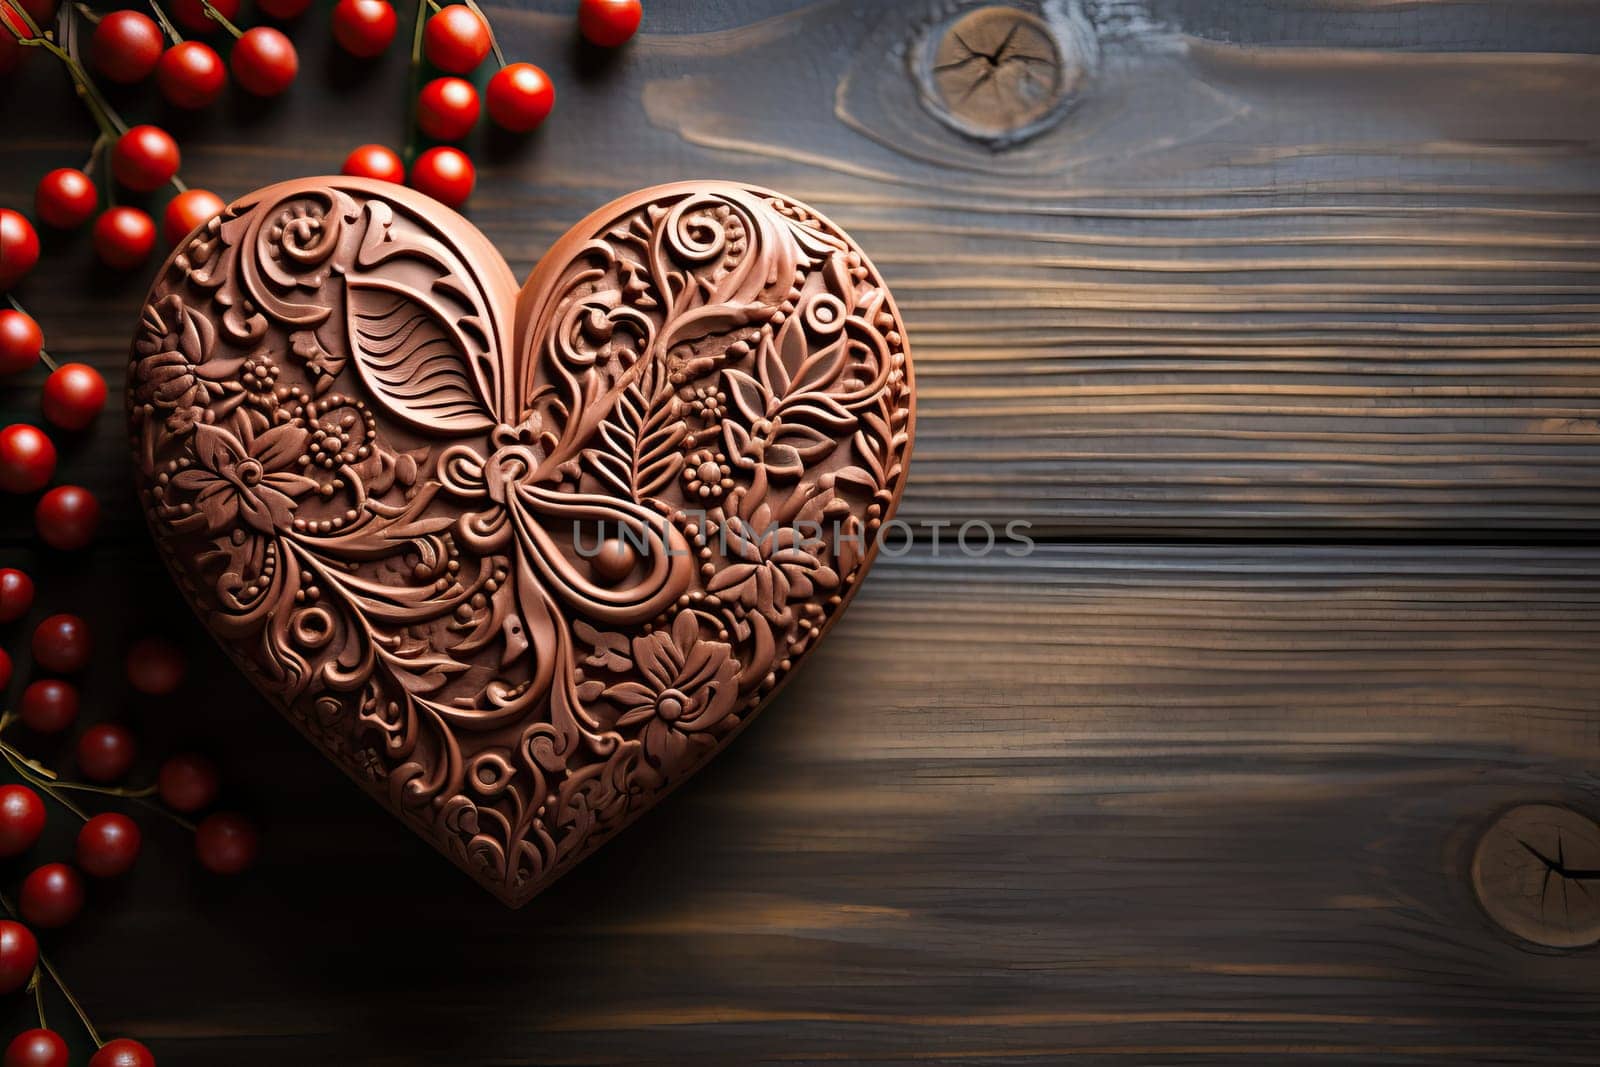 Chocolate heart for gift, chocolate heart made of chocolate candies on wooden background, greeting card and copy space.